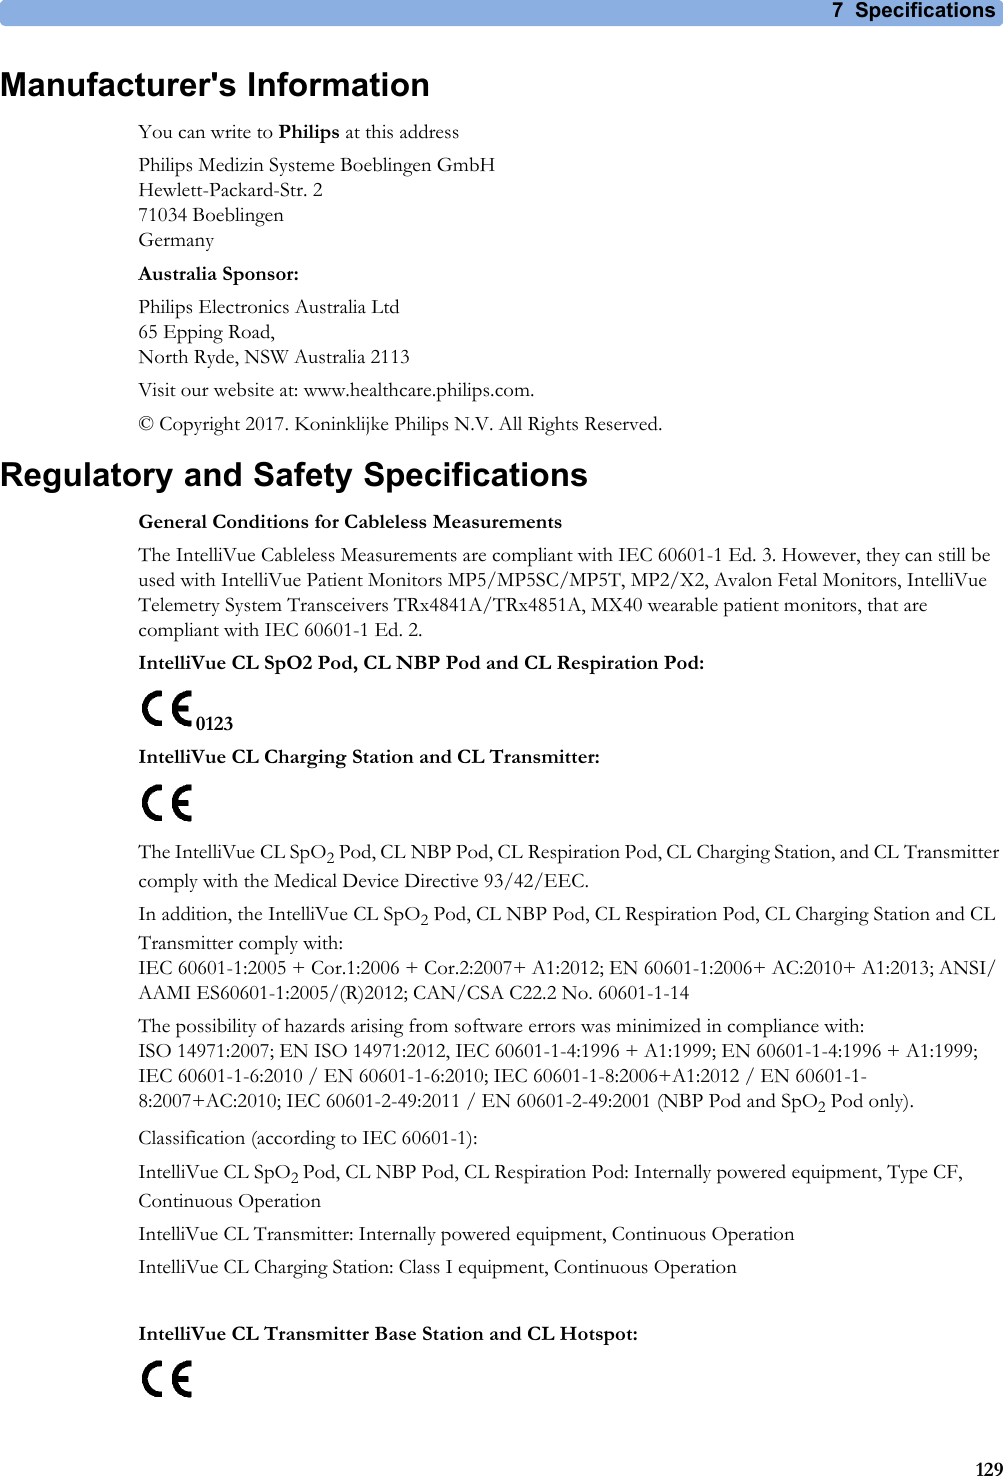 7 Specifications129Manufacturer&apos;s InformationYou can write to Philips at this addressPhilips Medizin Systeme Boeblingen GmbHHewlett-Packard-Str. 271034 BoeblingenGermanyAustralia Sponsor:Philips Electronics Australia Ltd 65 Epping Road,North Ryde, NSW Australia 2113Visit our website at: www.healthcare.philips.com.© Copyright 2017. Koninklijke Philips N.V. All Rights Reserved.Regulatory and Safety SpecificationsGeneral Conditions for Cableless MeasurementsThe IntelliVue Cableless Measurements are compliant with IEC 60601-1 Ed. 3. However, they can still be used with IntelliVue Patient Monitors MP5/MP5SC/MP5T, MP2/X2, Avalon Fetal Monitors, IntelliVue Telemetry System Transceivers TRx4841A/TRx4851A, MX40 wearable patient monitors, that are compliant with IEC 60601-1 Ed. 2.IntelliVue CL SpO2 Pod, CL NBP Pod and CL Respiration Pod:0123IntelliVue CL Charging Station and CL Transmitter:The IntelliVue CL SpO2 Pod, CL NBP Pod, CL Respiration Pod, CL Charging Station, and CL Transmitter comply with the Medical Device Directive 93/42/EEC. In addition, the IntelliVue CL SpO2 Pod, CL NBP Pod, CL Respiration Pod, CL Charging Station and CL Transmitter comply with:IEC 60601-1:2005 + Cor.1:2006 + Cor.2:2007+ A1:2012; EN 60601-1:2006+ AC:2010+ A1:2013; ANSI/AAMI ES60601-1:2005/(R)2012; CAN/CSA C22.2 No. 60601-1-14The possibility of hazards arising from software errors was minimized in compliance with:ISO 14971:2007; EN ISO 14971:2012, IEC 60601-1-4:1996 + A1:1999; EN 60601-1-4:1996 + A1:1999; IEC 60601-1-6:2010 / EN 60601-1-6:2010; IEC 60601-1-8:2006+A1:2012 / EN 60601-1-8:2007+AC:2010; IEC 60601-2-49:2011 / EN 60601-2-49:2001 (NBP Pod and SpO2 Pod only).Classification (according to IEC 60601-1):IntelliVue CL SpO2 Pod, CL NBP Pod, CL Respiration Pod: Internally powered equipment, Type CF, Continuous OperationIntelliVue CL Transmitter: Internally powered equipment, Continuous OperationIntelliVue CL Charging Station: Class I equipment, Continuous OperationIntelliVue CL Transmitter Base Station and CL Hotspot: